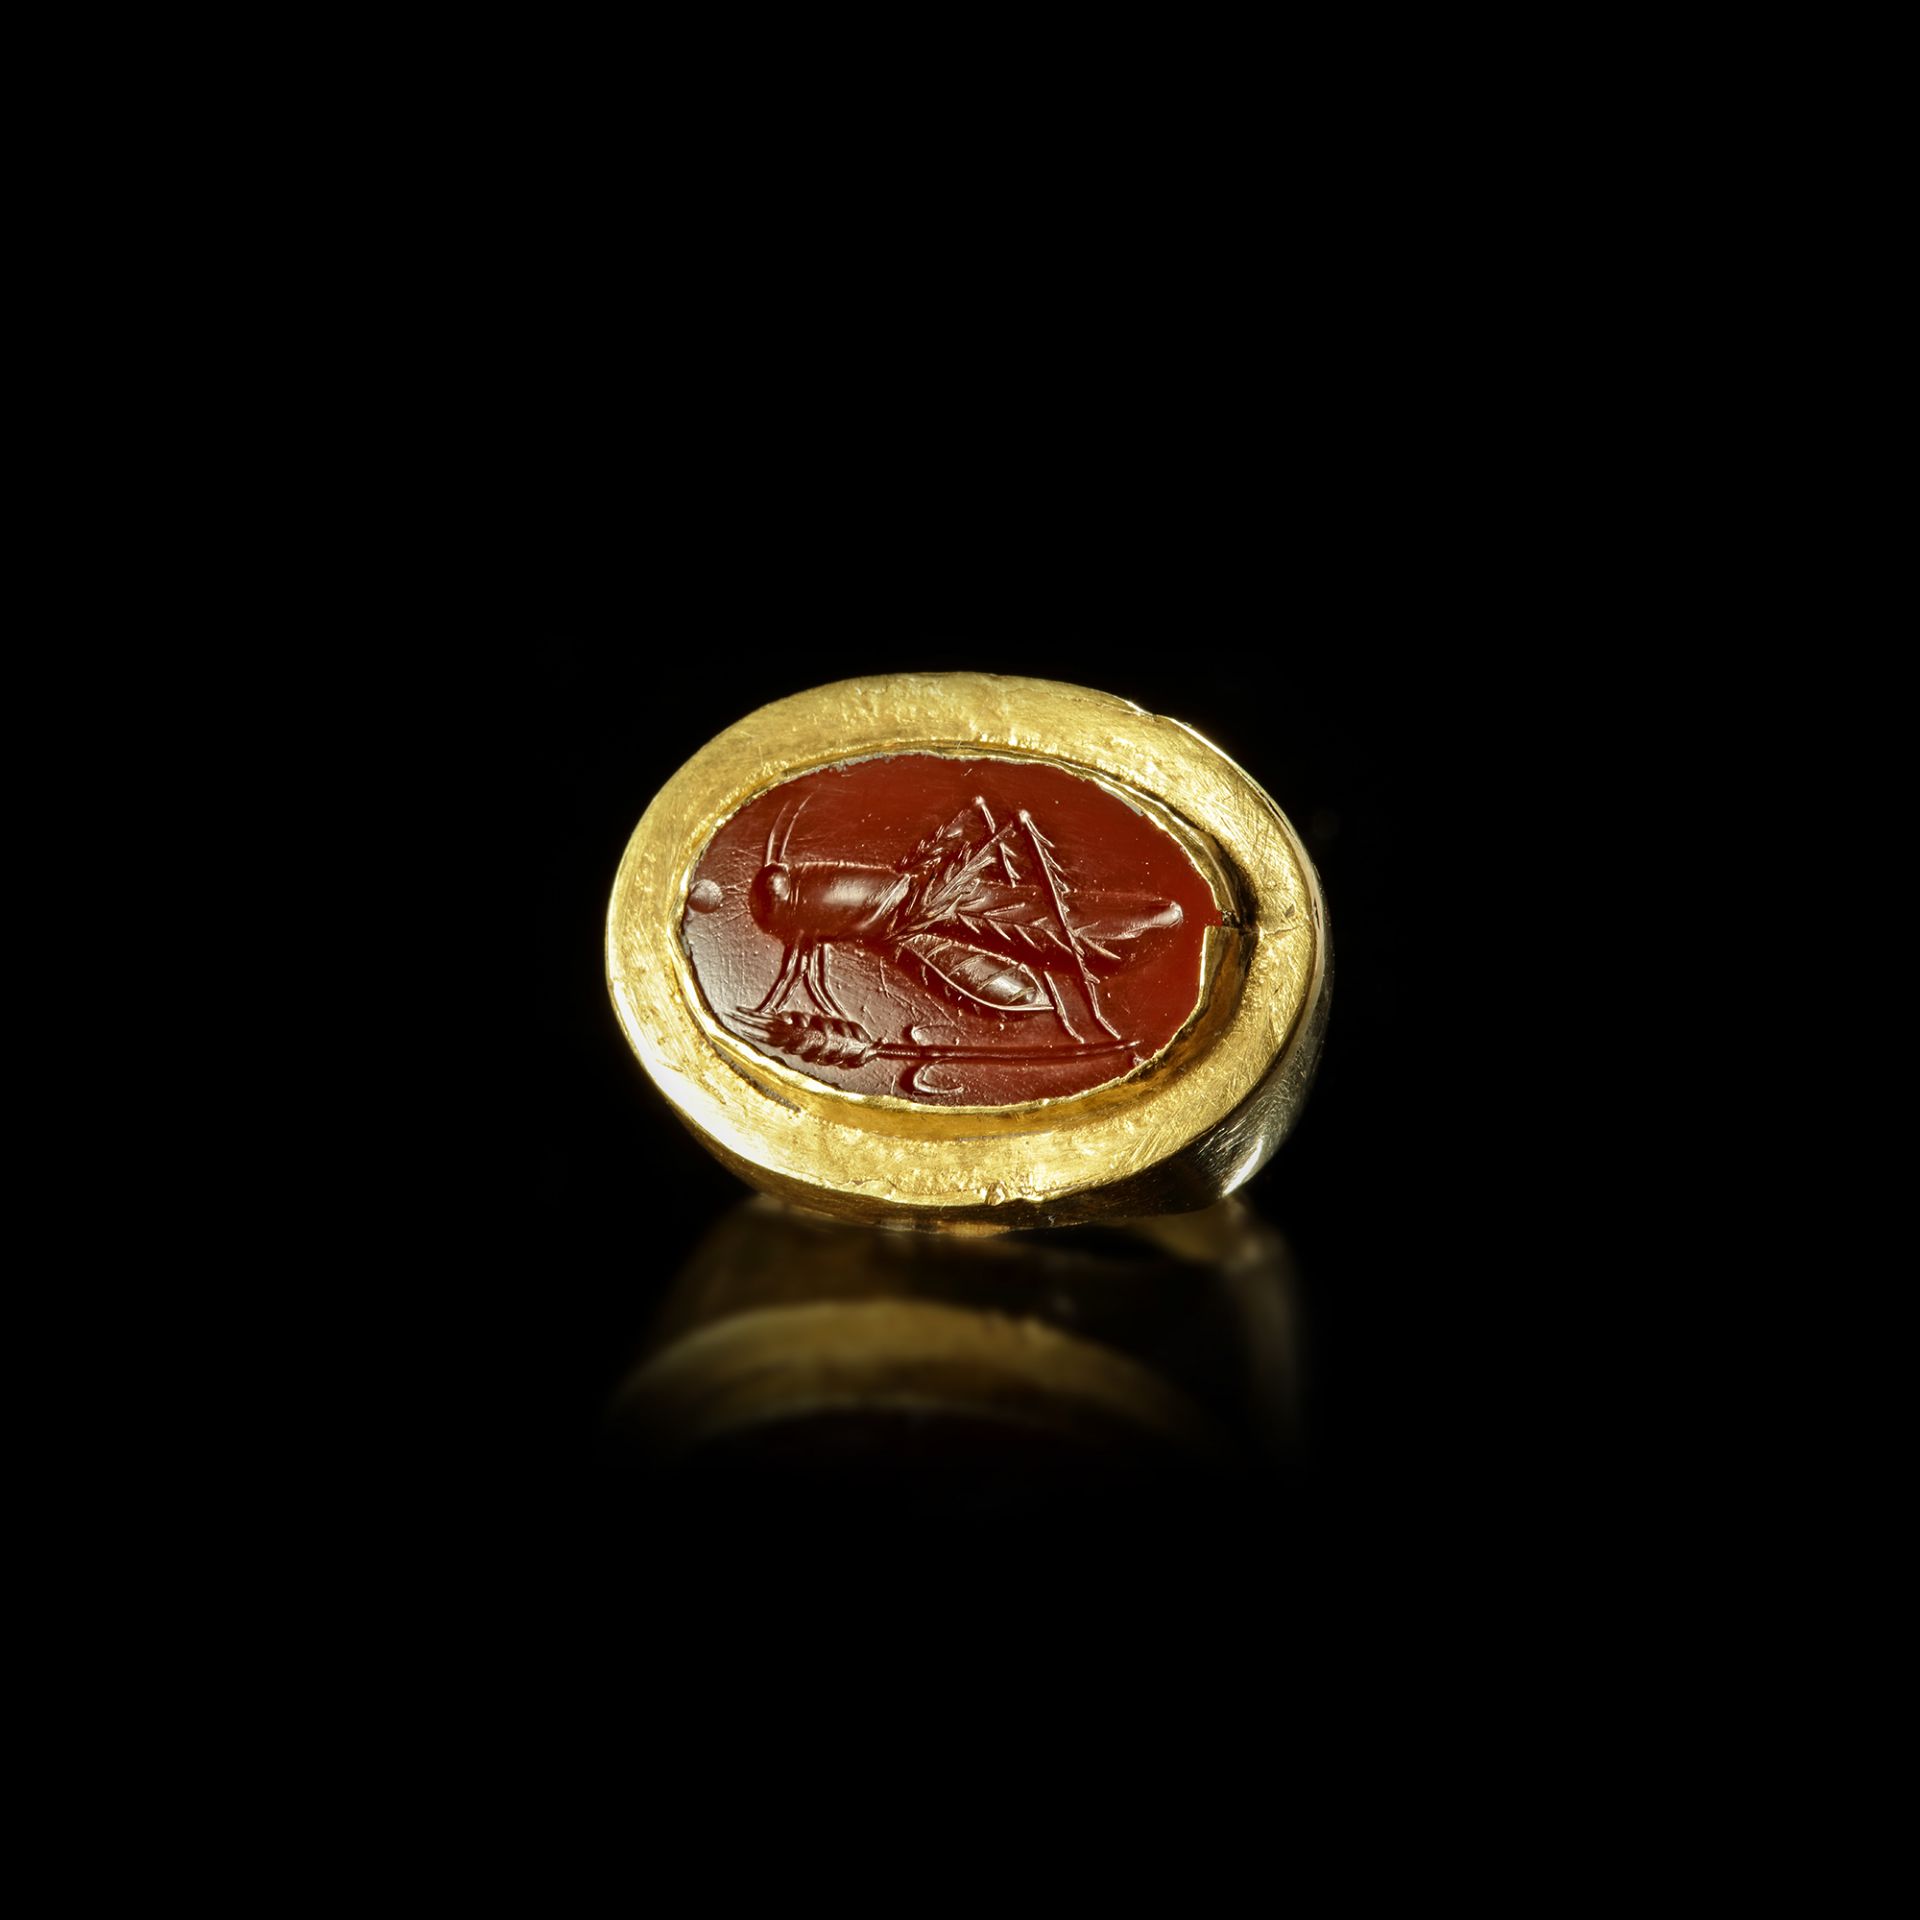 A HELLENISTIC GOLD RING WITH AN INTAGLIO SHOWING A LOCUST, 2ND-3RD CENTURY BC